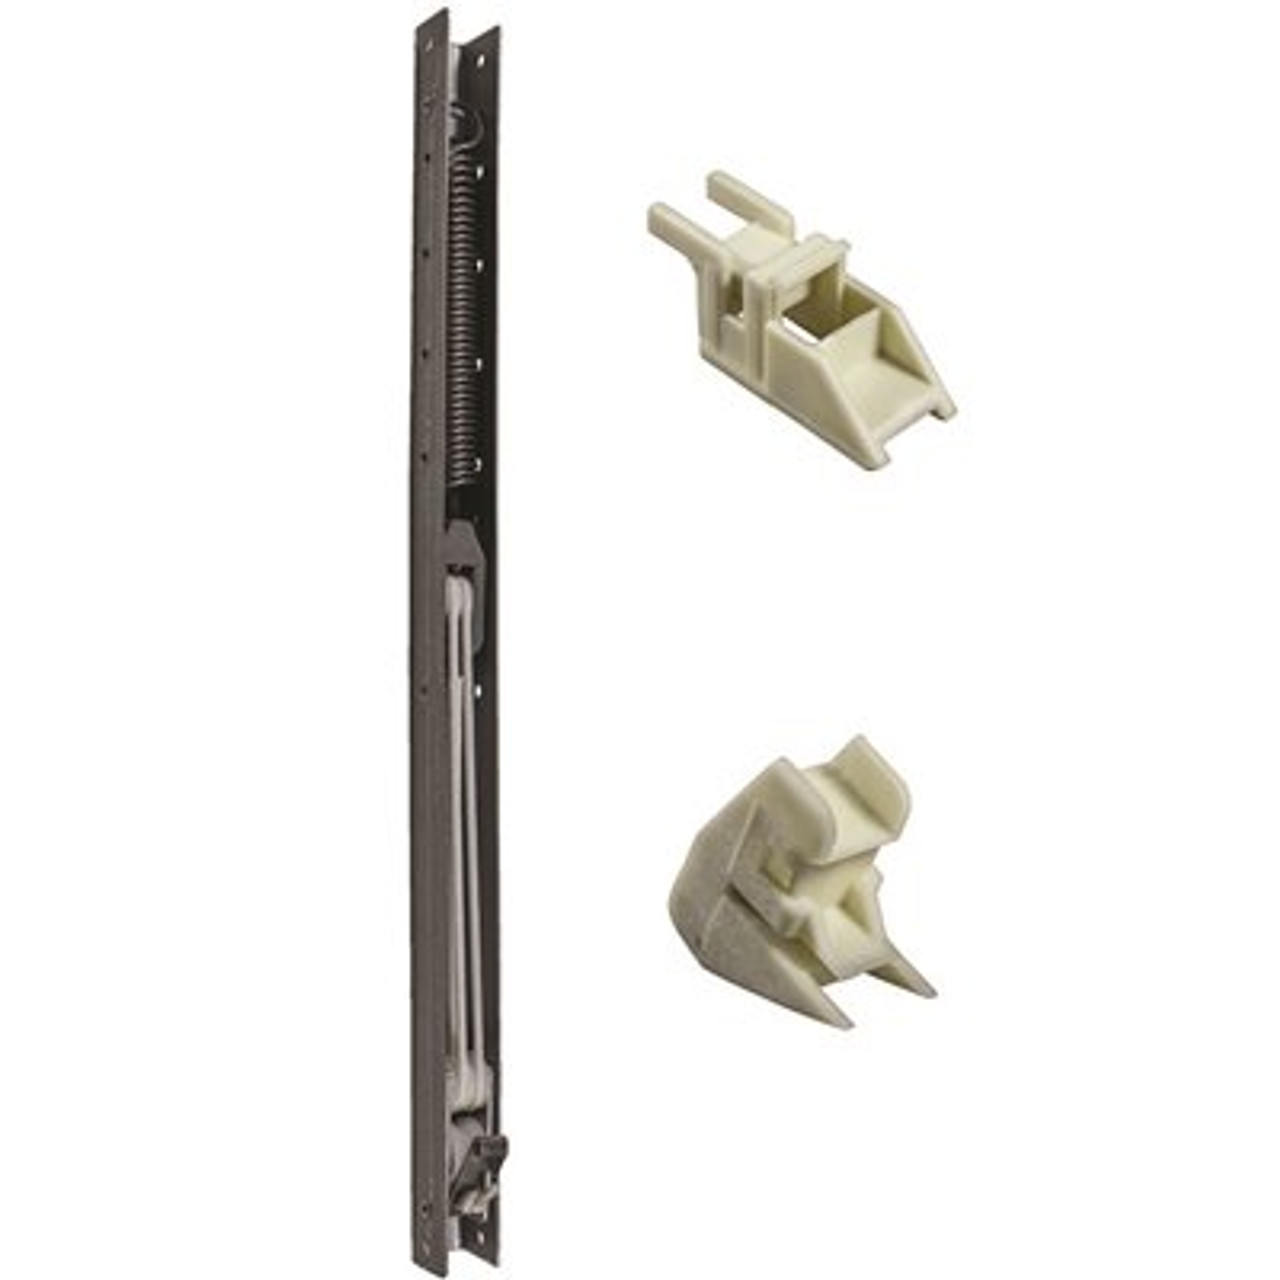 23 In. L Window Channel Balance 2210 With 9/16 In. W X 5/8 In. D Top And Bottom End Brackets Attached - 314413435